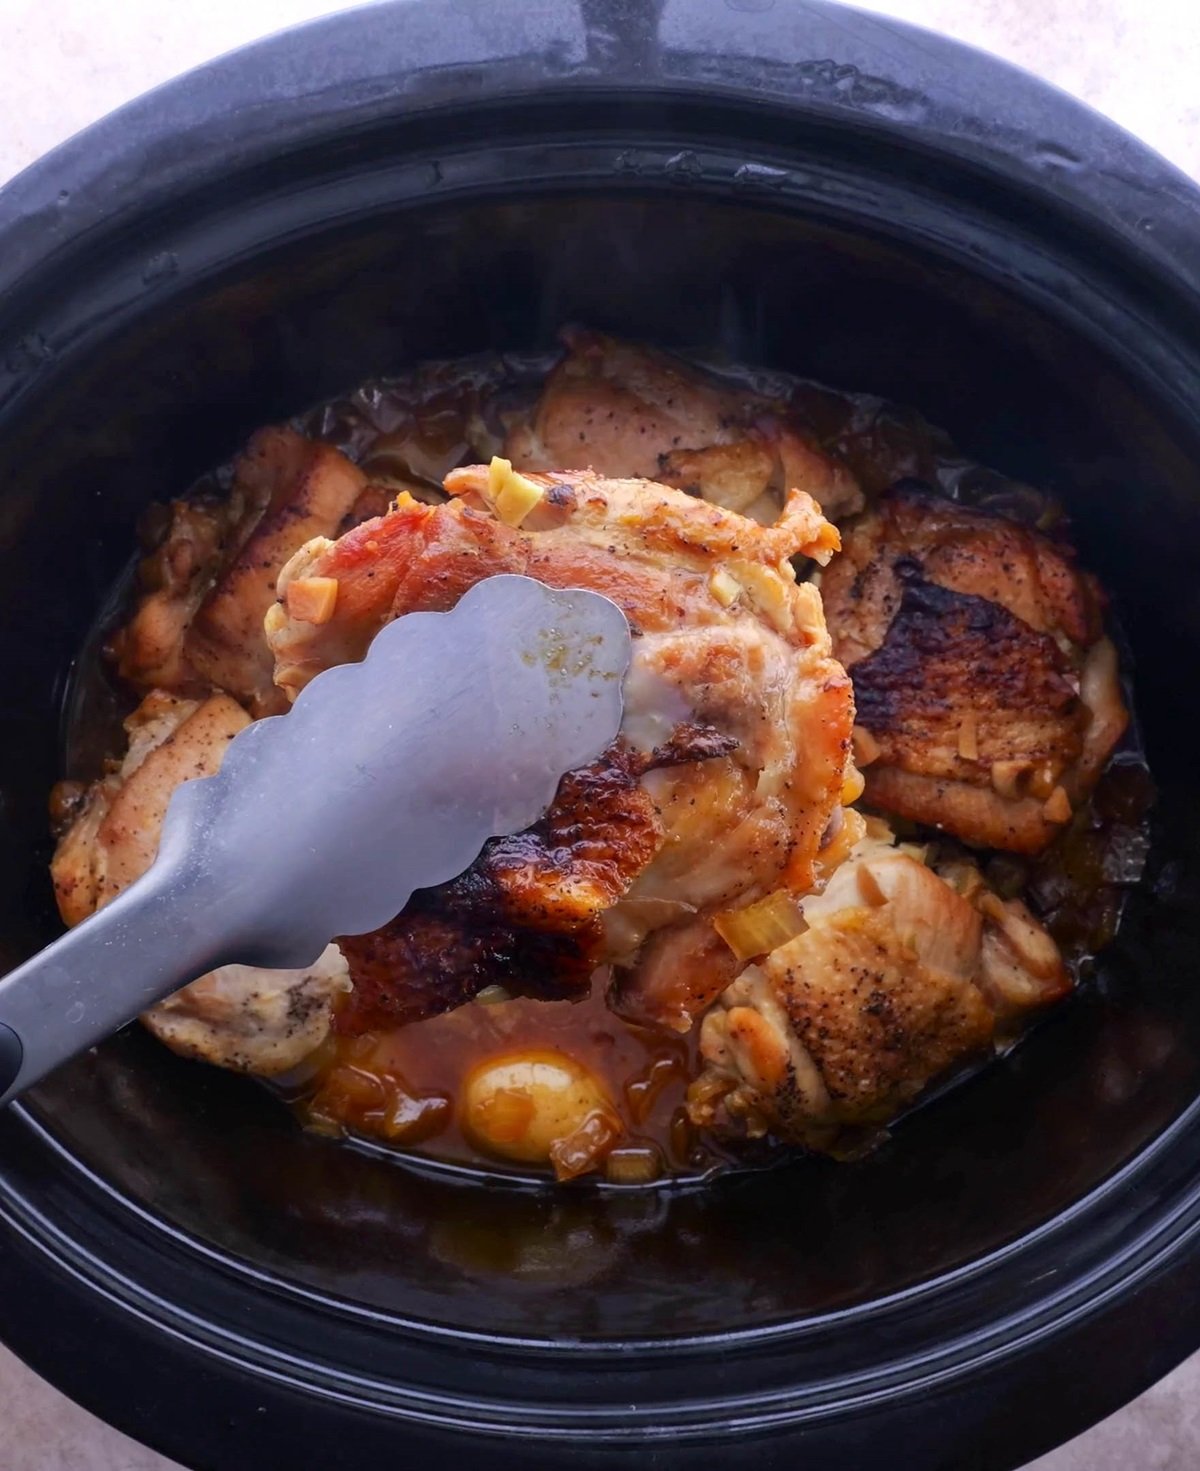 Tongs holding a chicken thigh out of a crock pot, finished cooking.